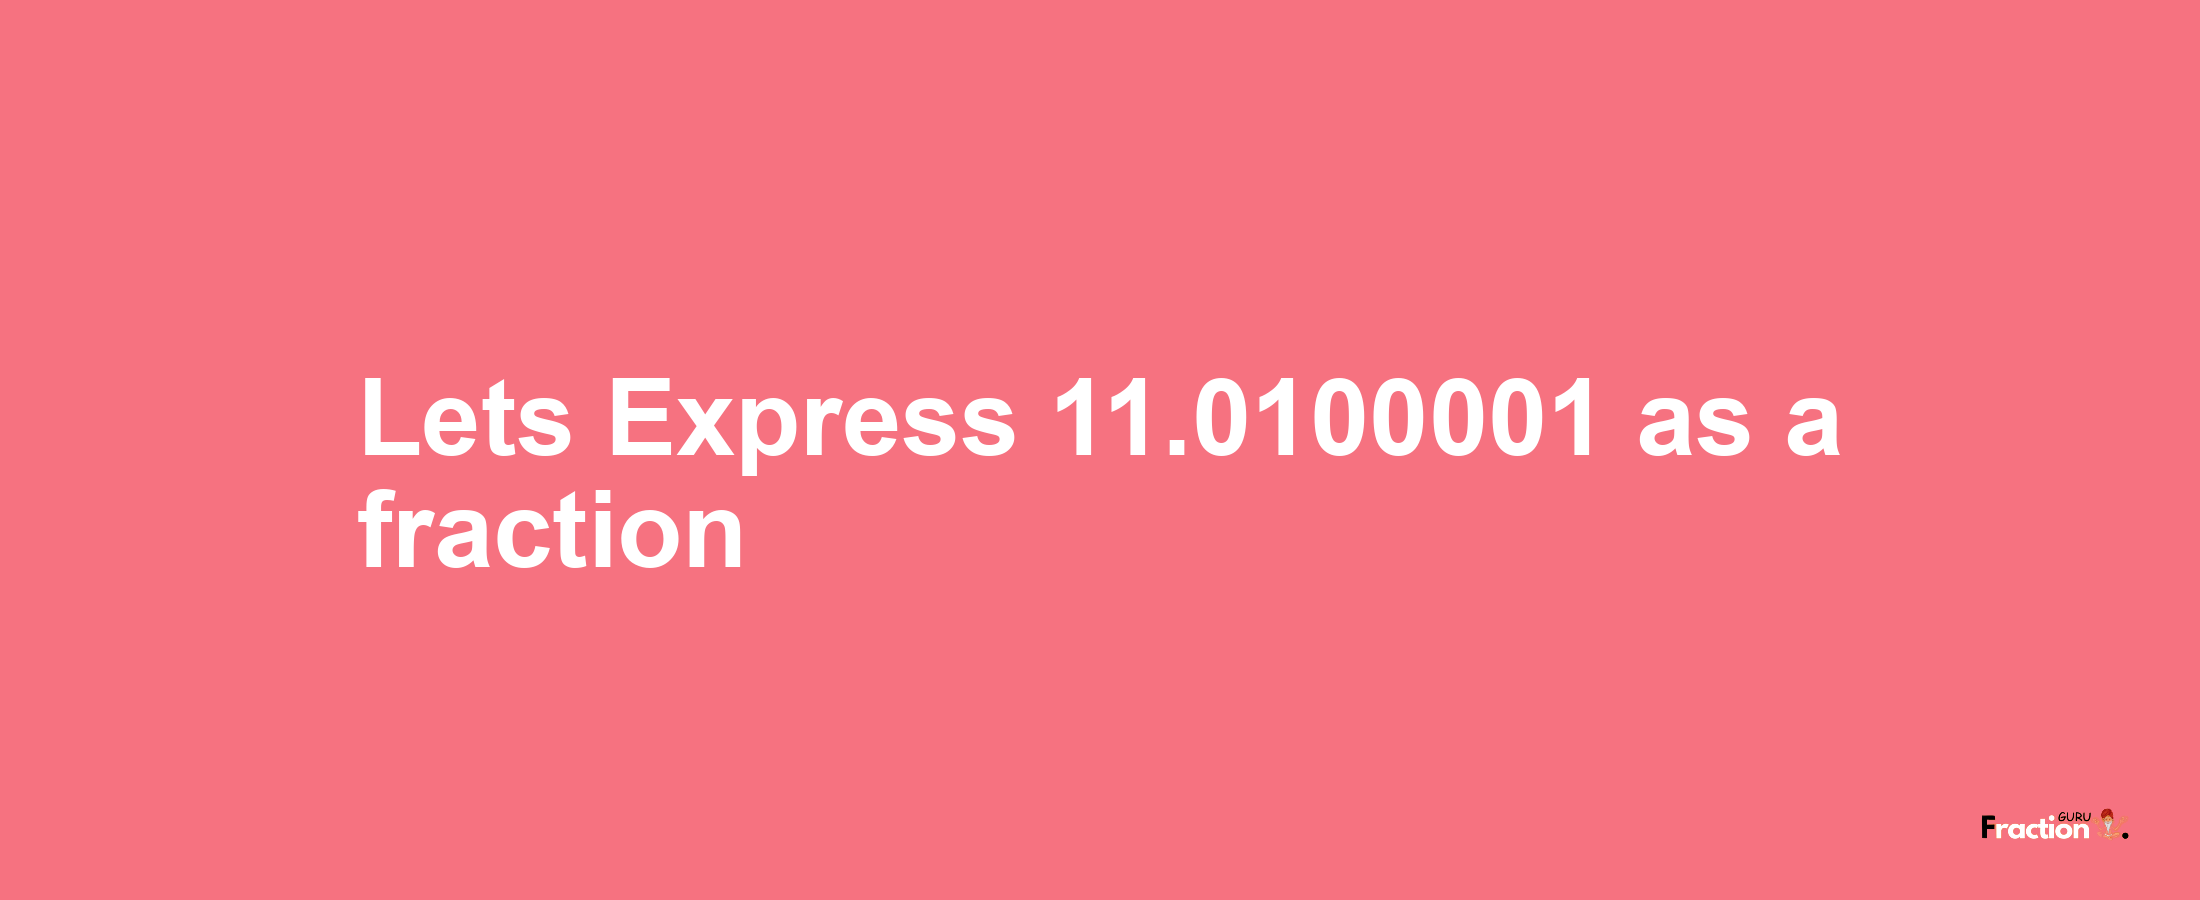 Lets Express 11.0100001 as afraction